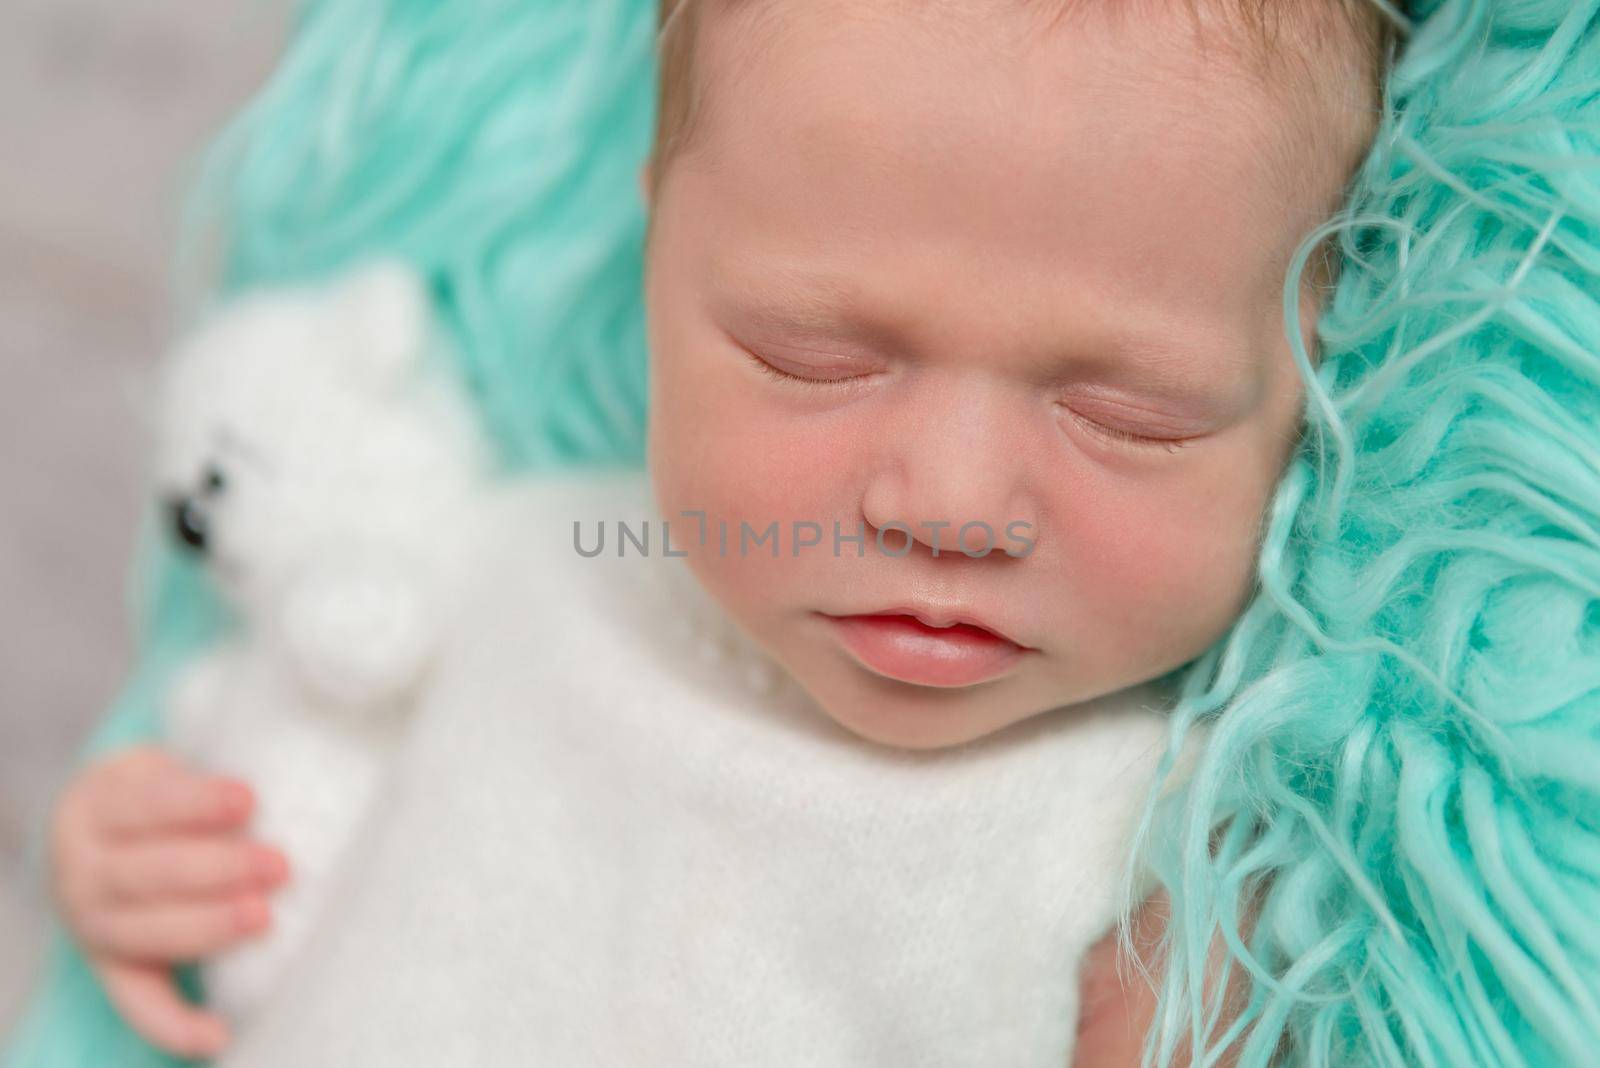 sweet sleeping newborn baby with toy on turquoise fluffy blanket, closeup